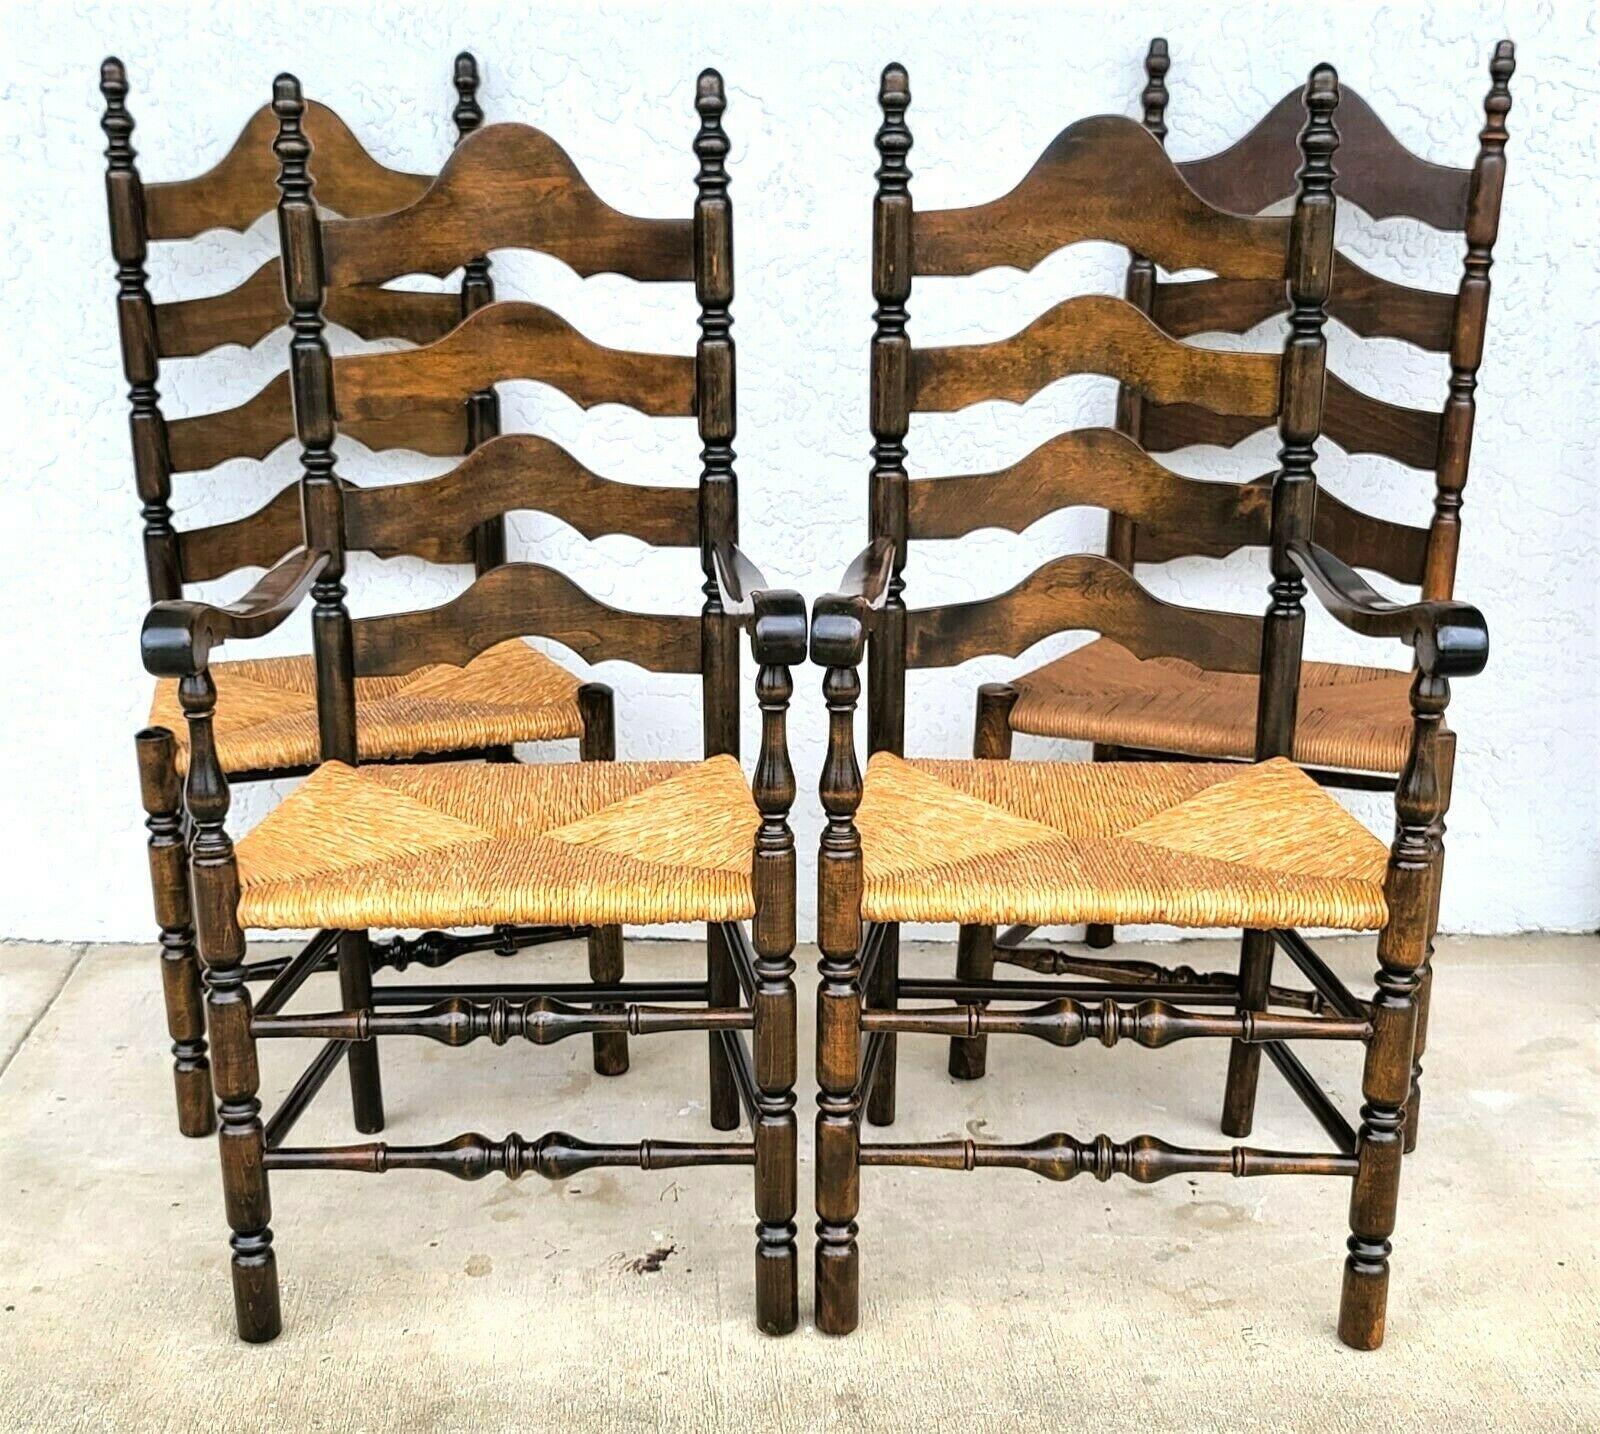 Offering one of our recent palm beach estate fine furniture acquisitions of a 
Set of 4 mid century french country ladder ribbon back rush seat dining chairs
Set includes 2 arm and 2 side chairs

Approximate Measurements in inches
Armchairs:
44.5